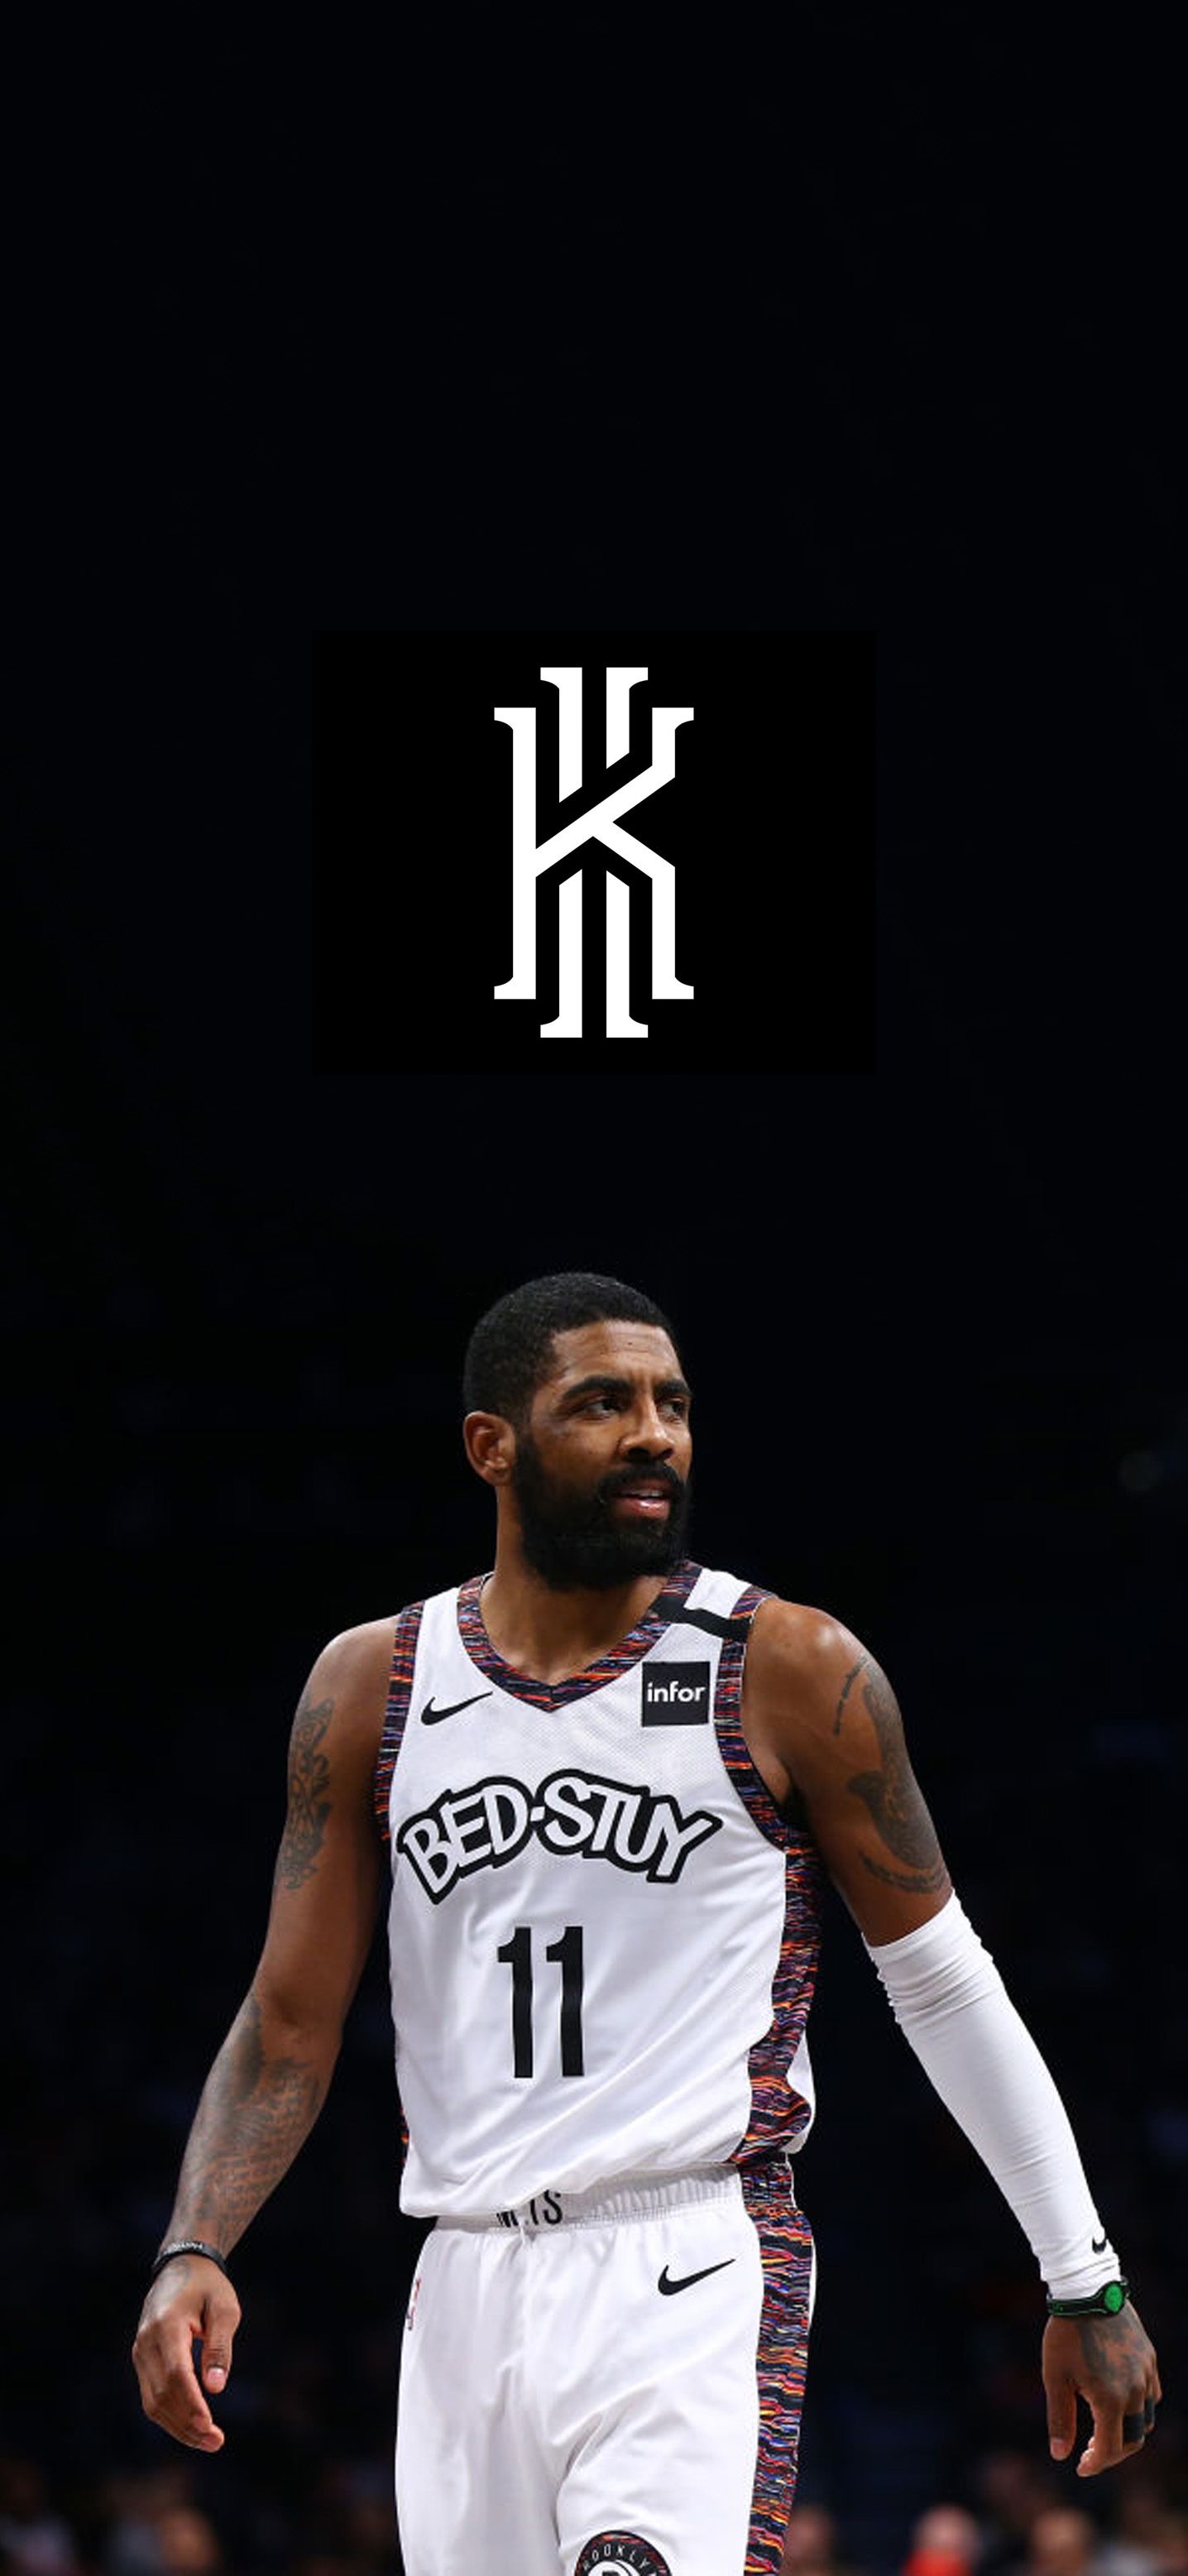 Kyrie Irving Wallpaper Irving wallpapers Kyrie irving logo